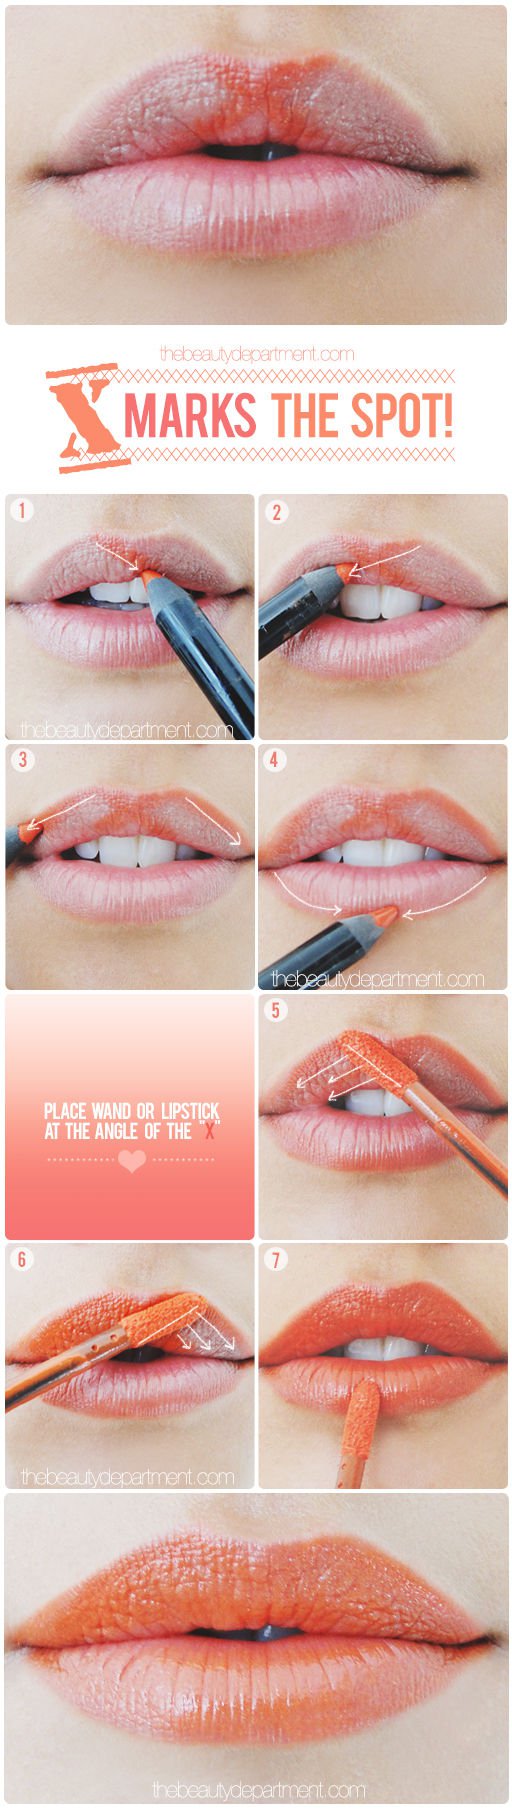 9 Smart Makeup Tips Every Woman Should Give A Try